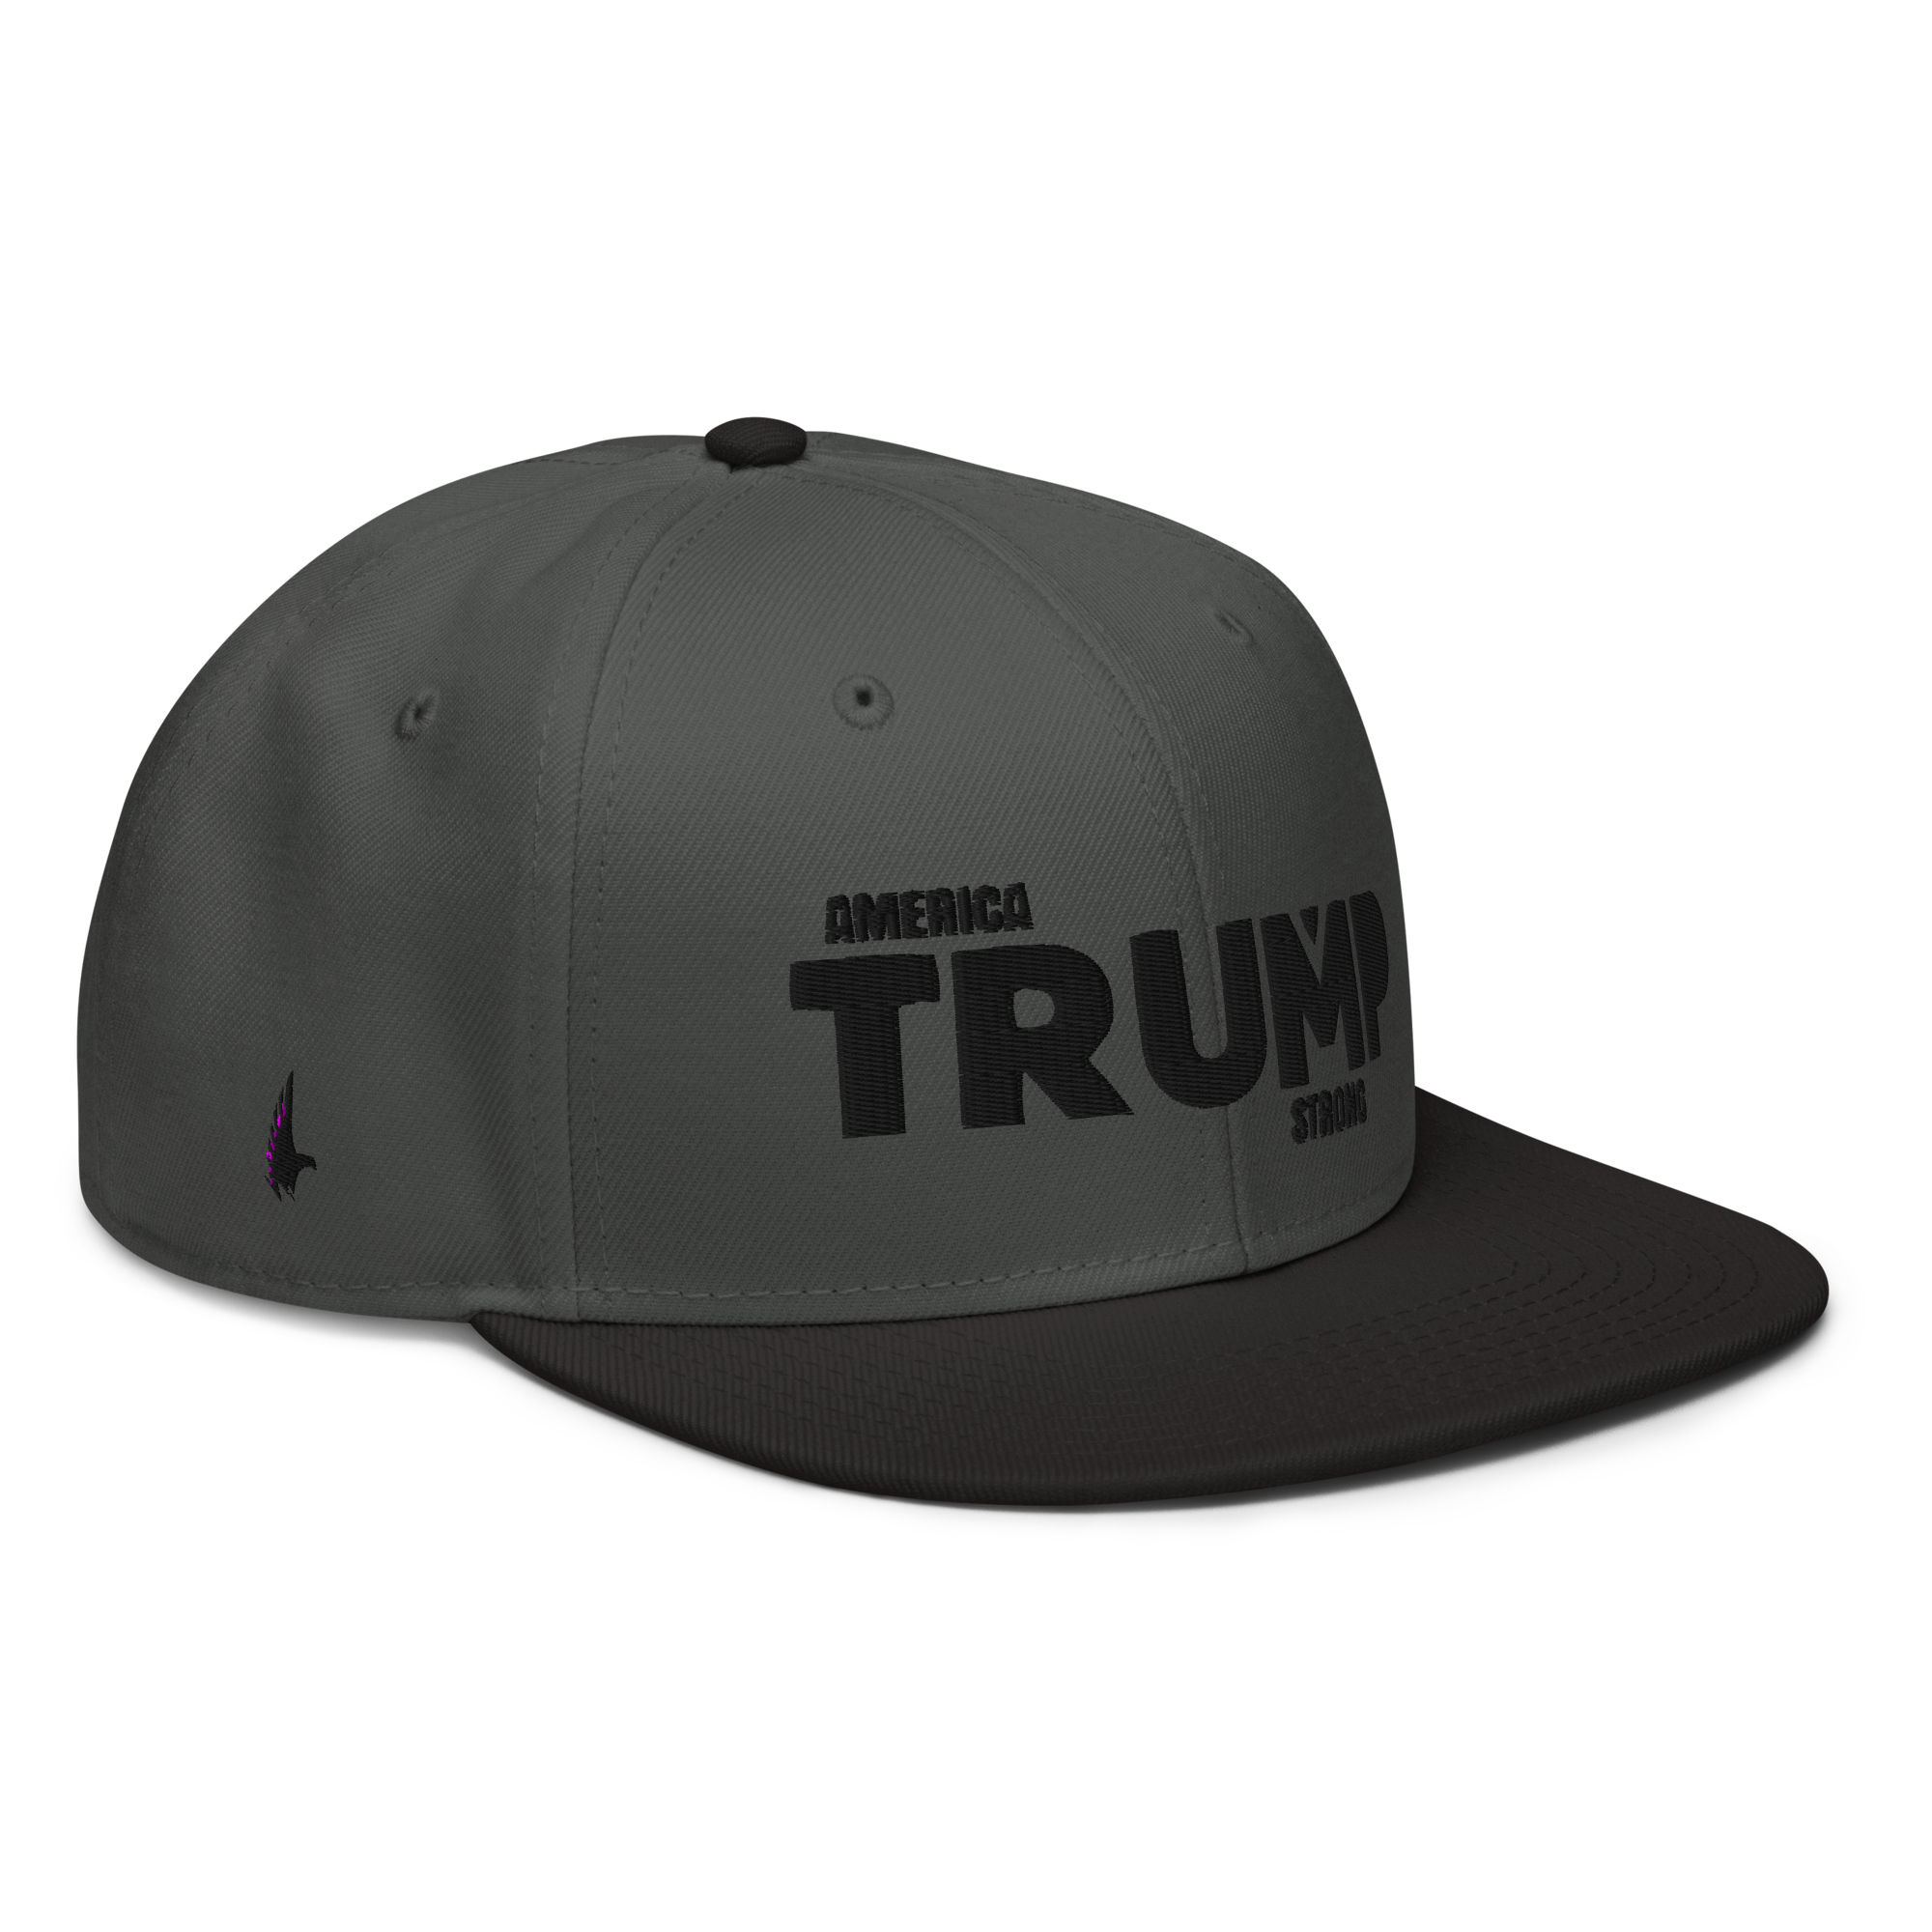 Loyalty Vibes America Trump Strong Snapback Hat Charcoal Grey Black Black One size - Loyalty Vibes